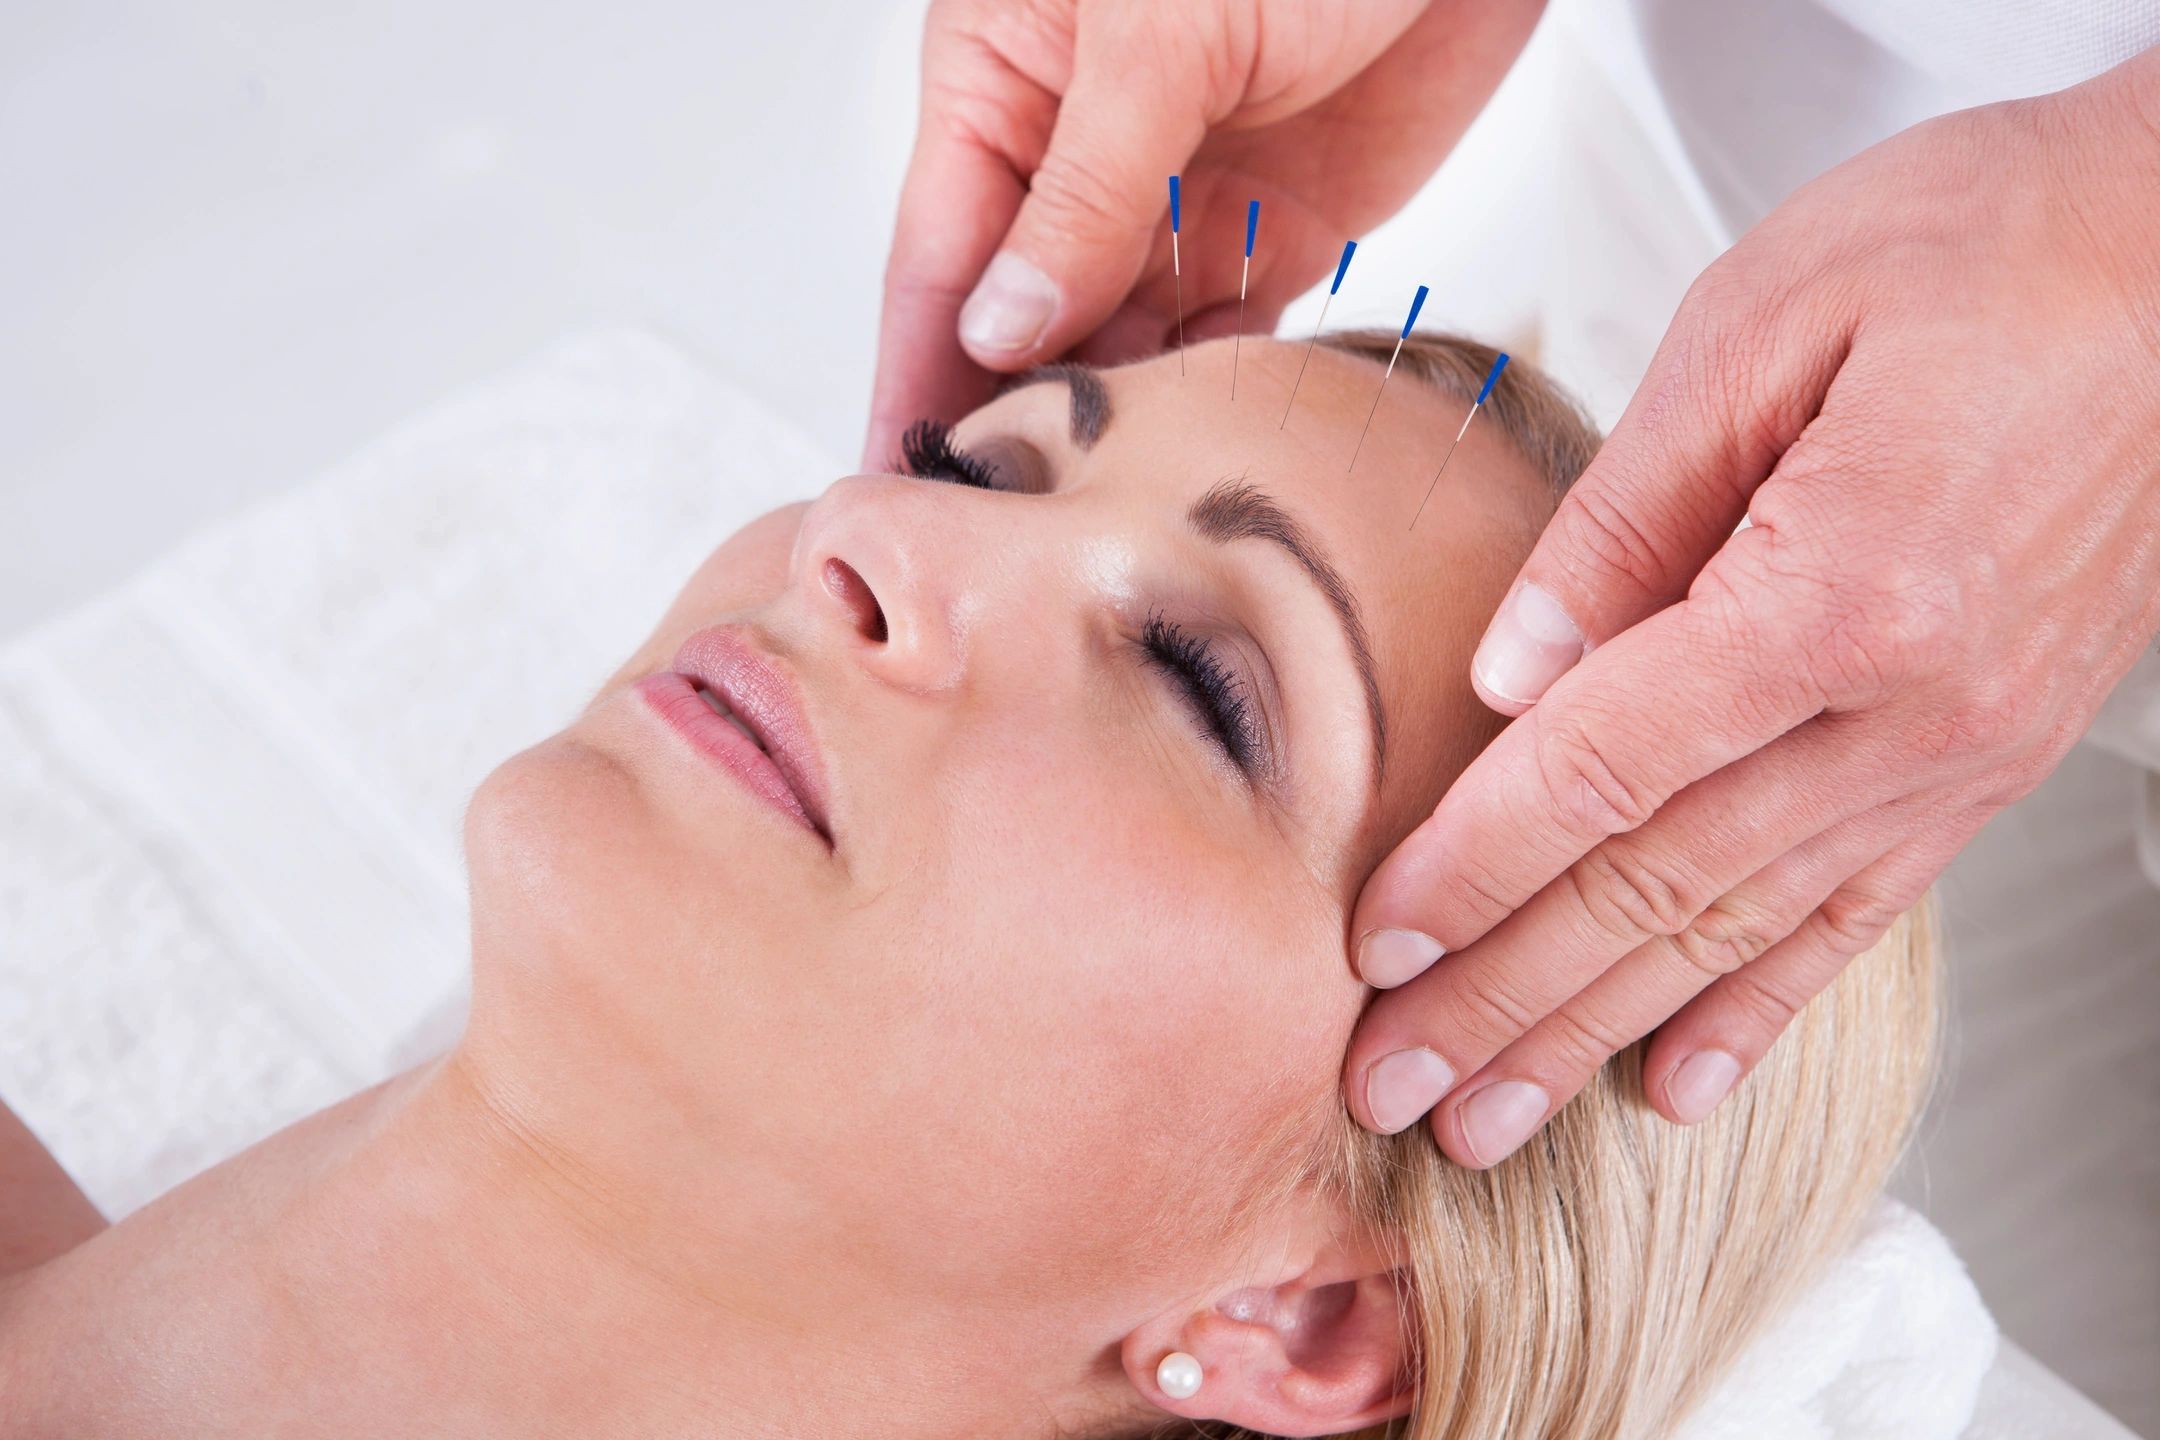 acupuncture in San Clemente, also service at Dana Point, San Juan Capistrano, laguna Niguel, Mission